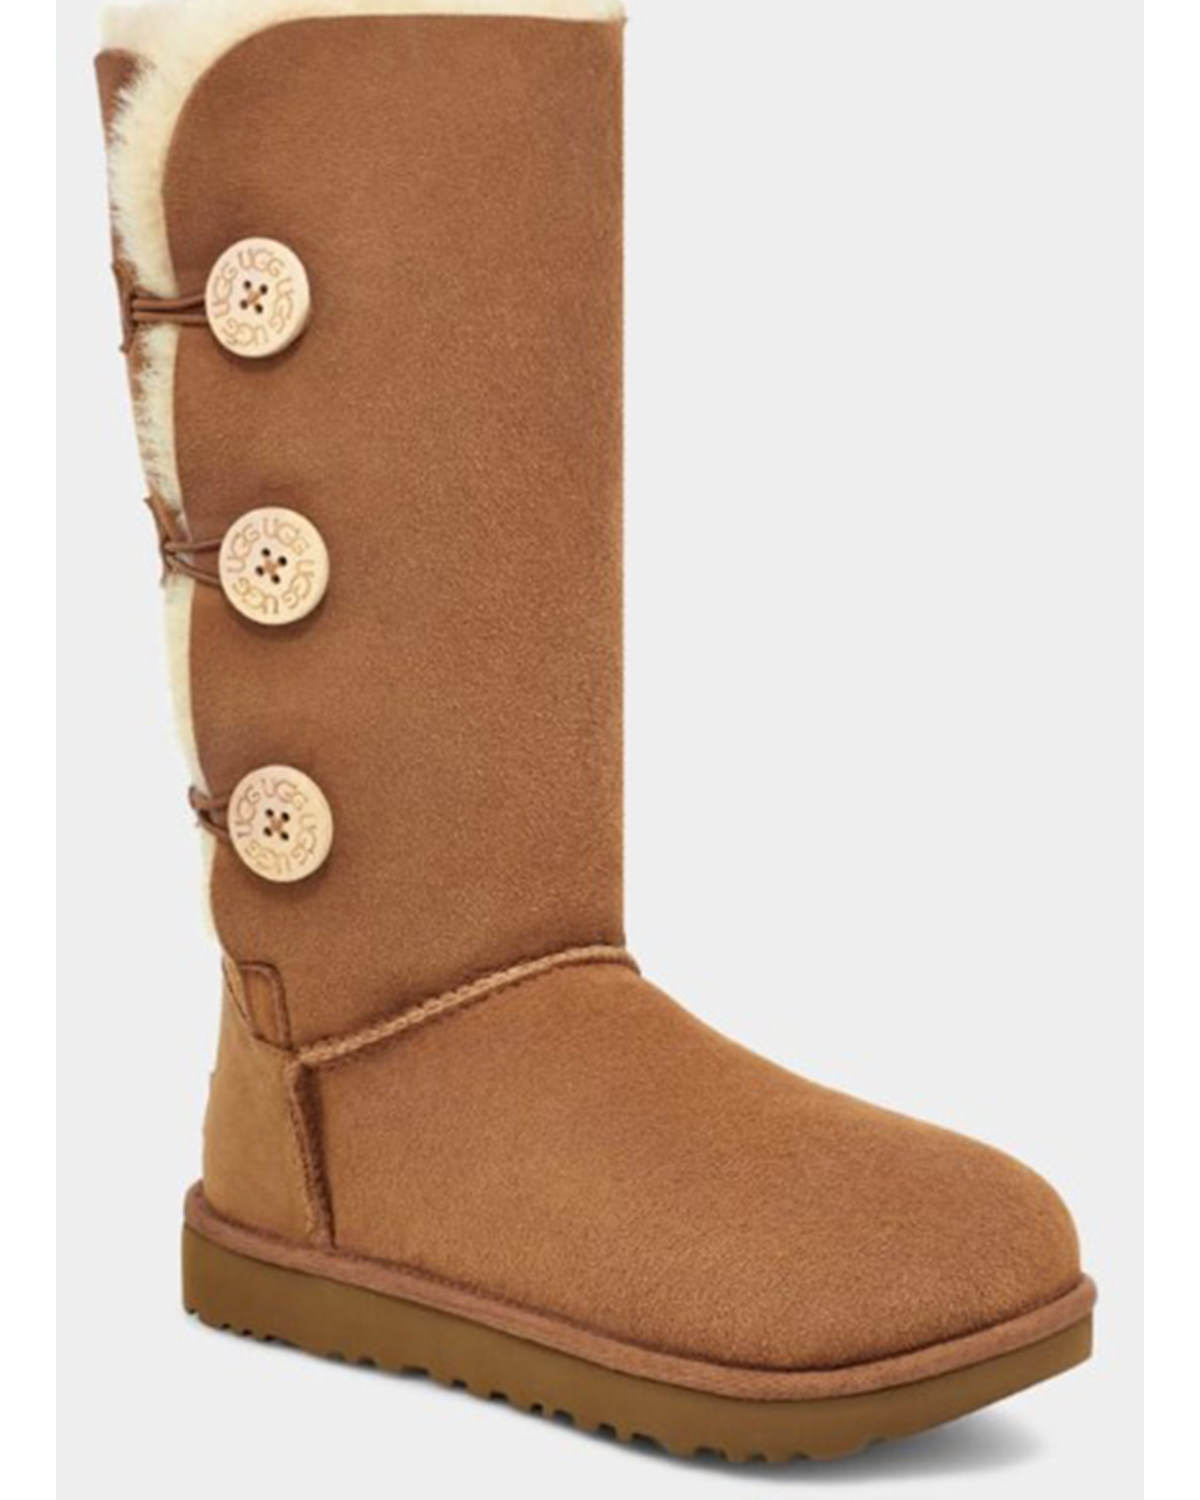 tall uggs with buttons